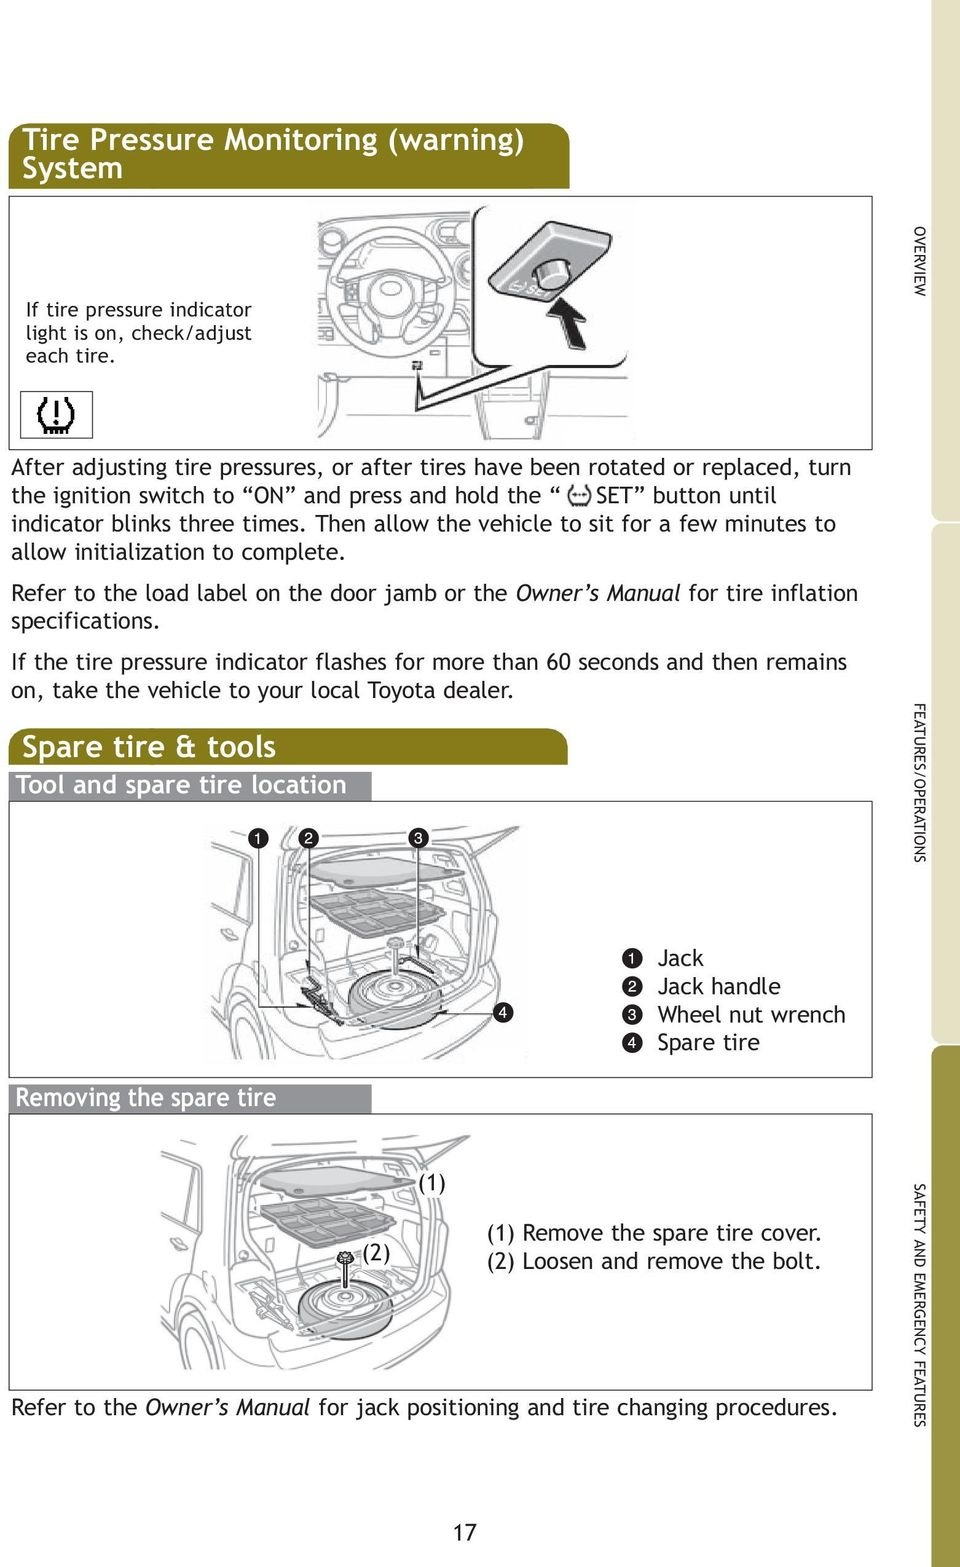 Then allow the vehicle to sit for a few minutes to allow initialization to complete. Refer to the load label on the door jamb or the Owner s Manual for tire inflation specifications.